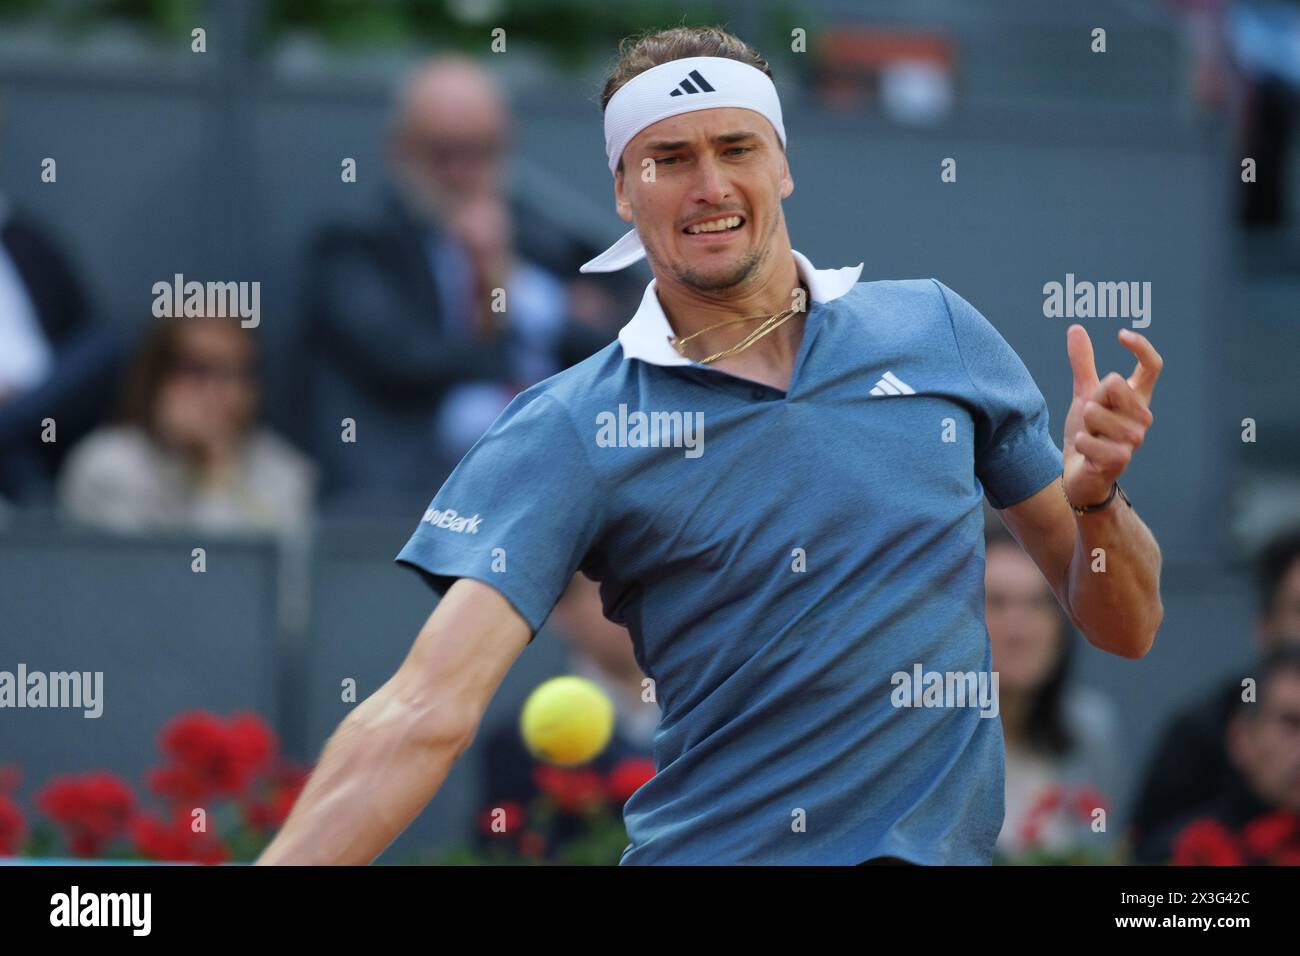 Alexander Zverev of Germany  against Borna Coric during their Men's Singles second round match on day four of the Mutua Madrid Open at La Caja Magica Stock Photo